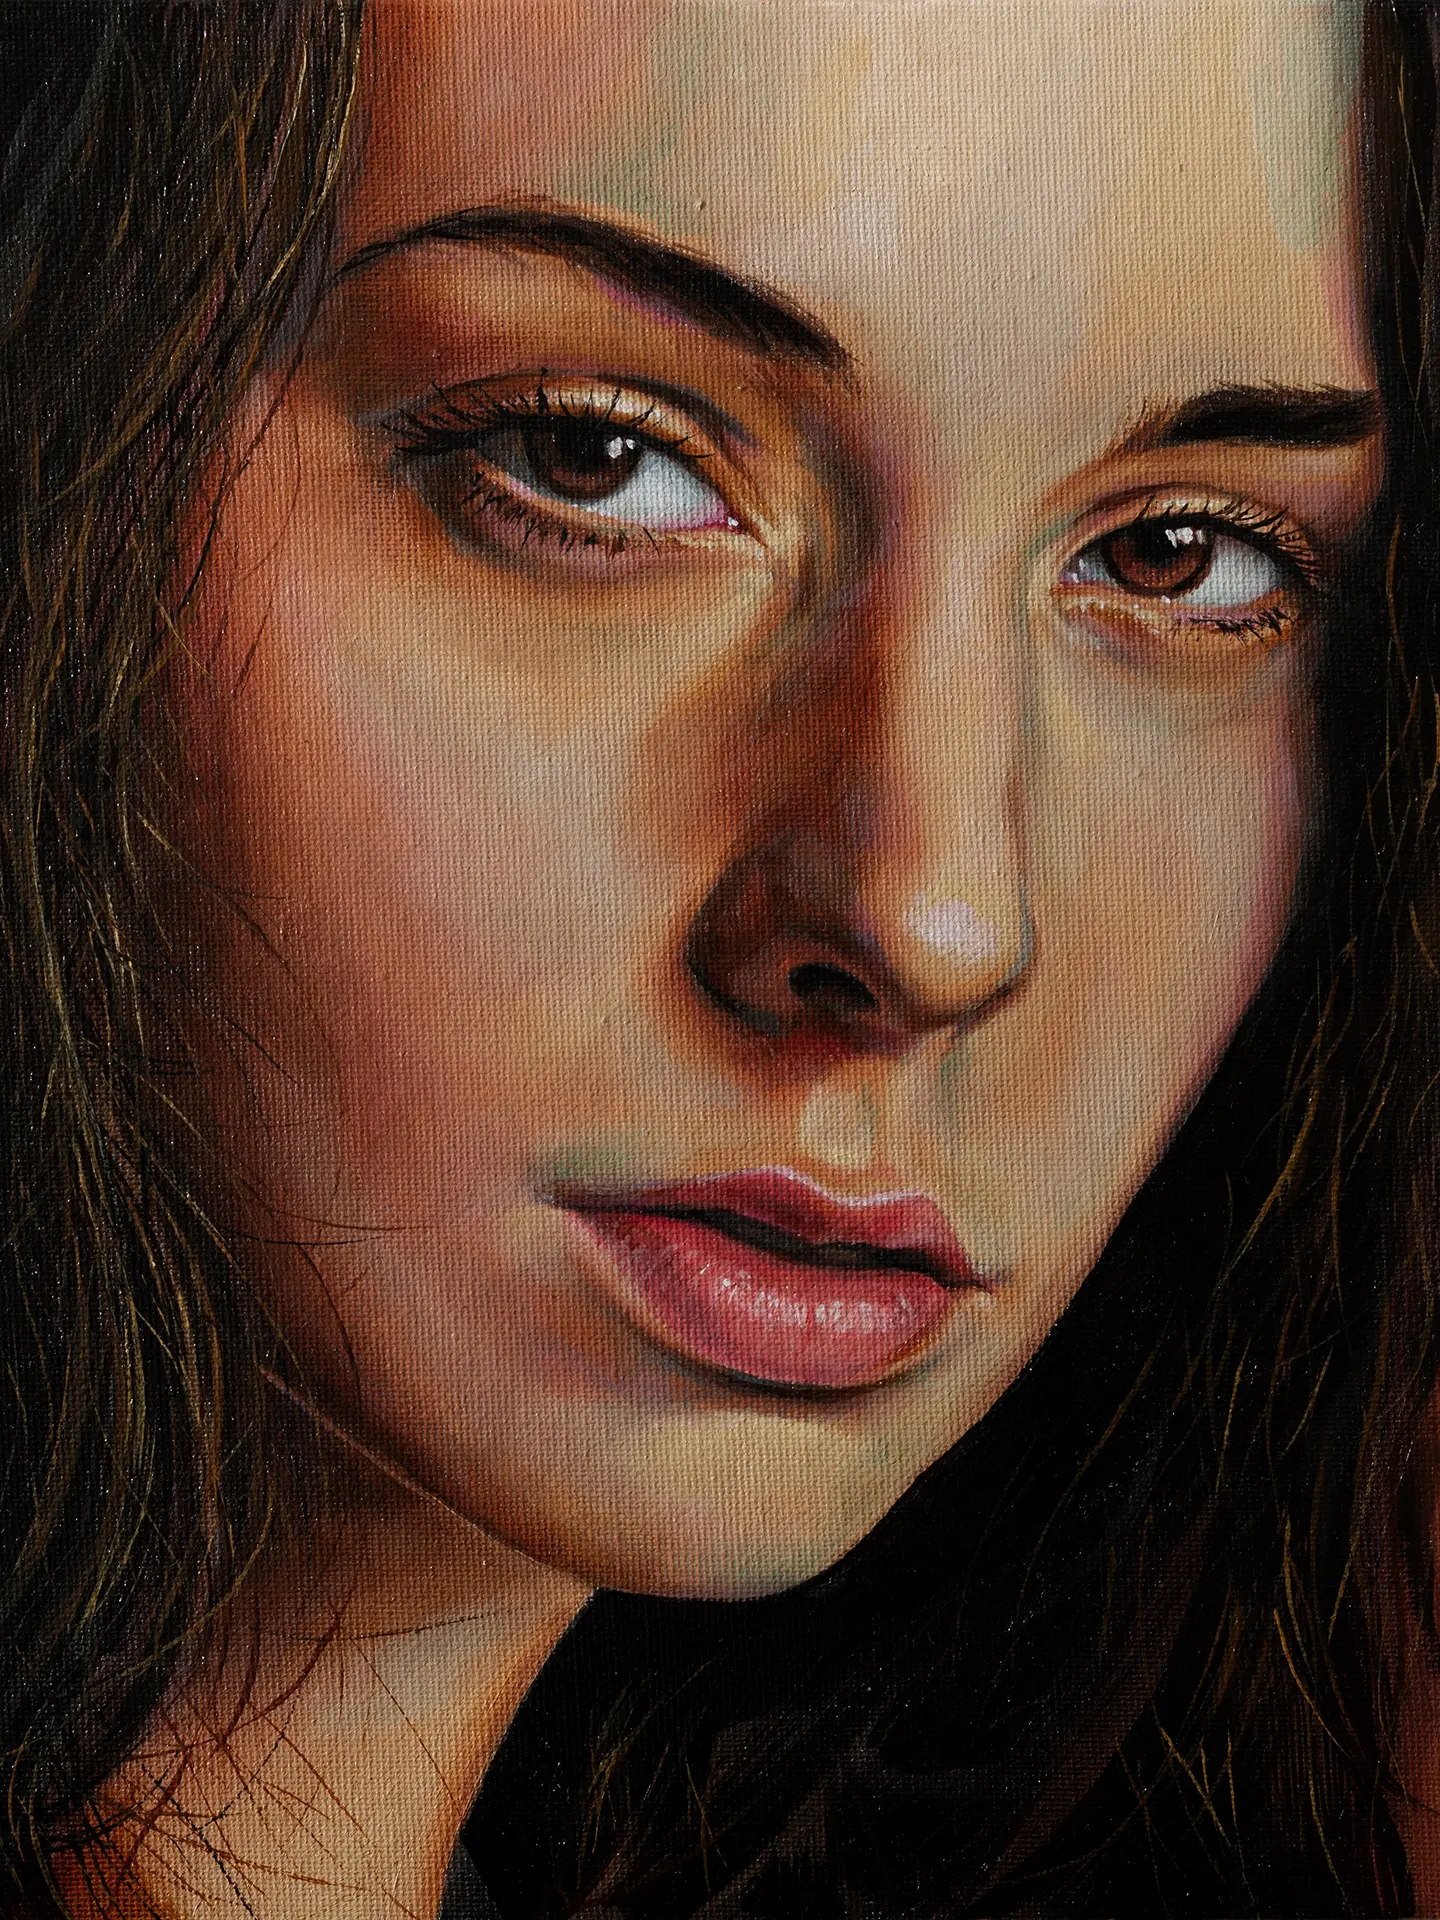 Detail of one of my oil paintings